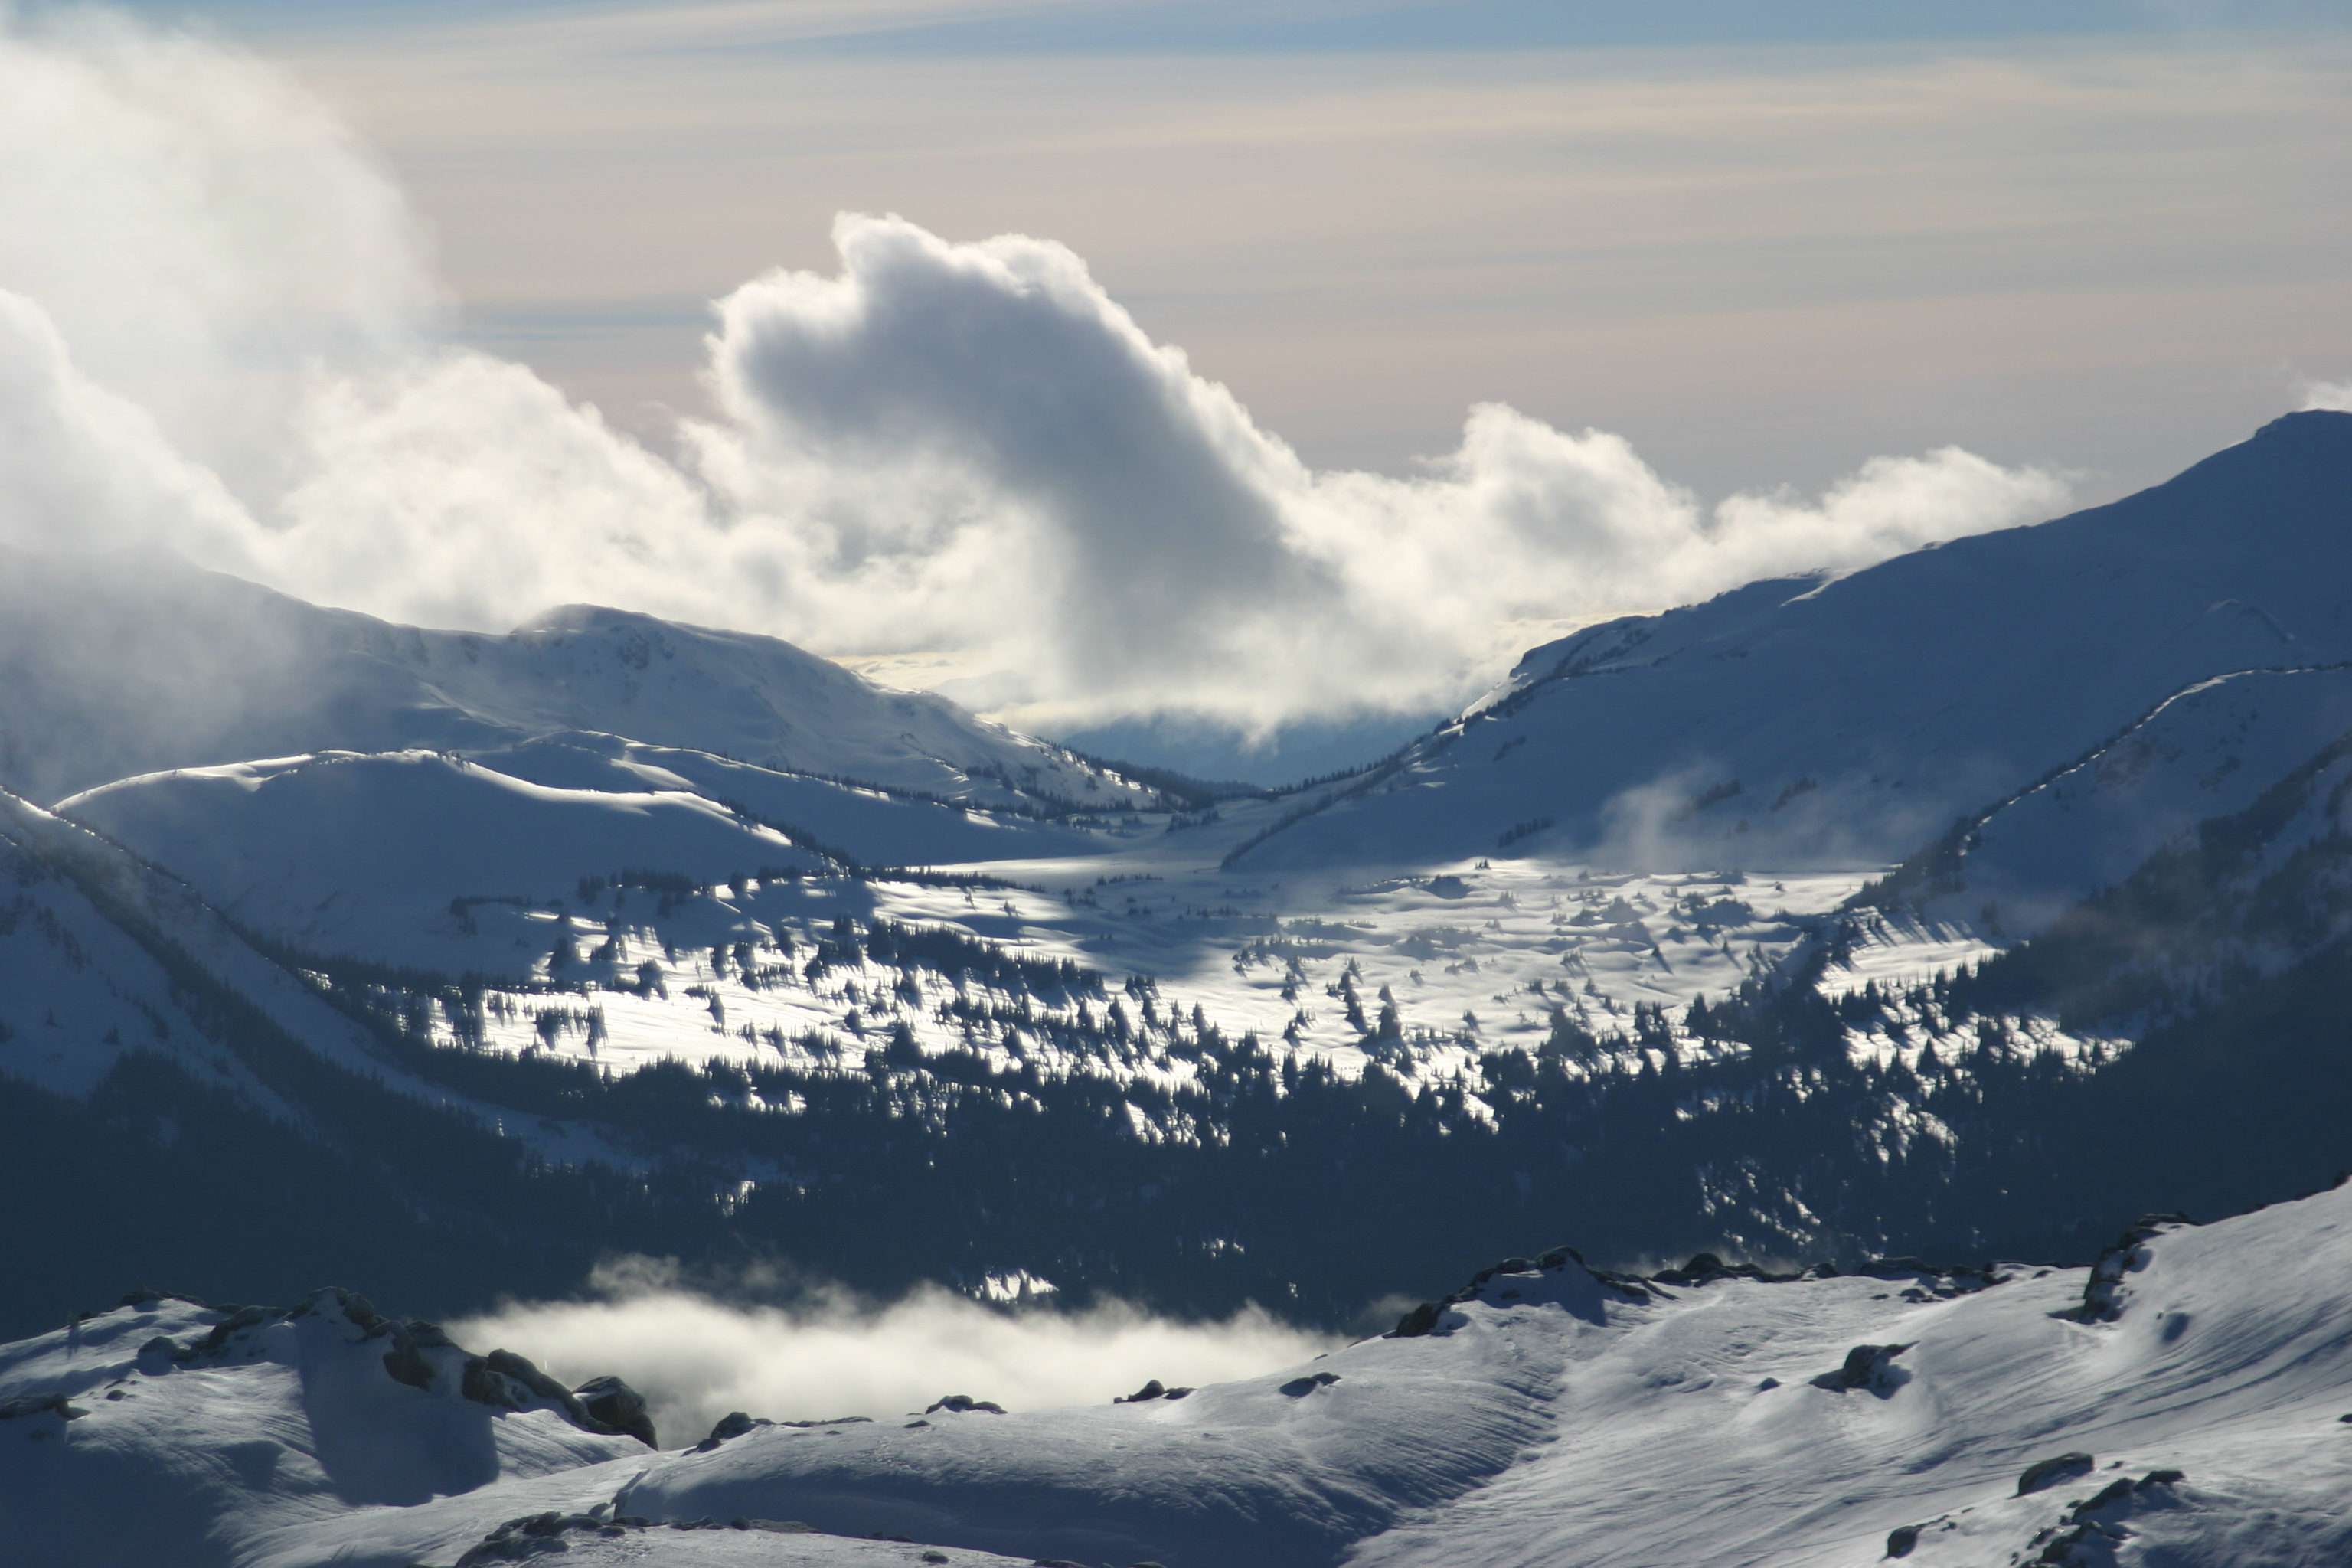 View from the top of Whistler Mountain